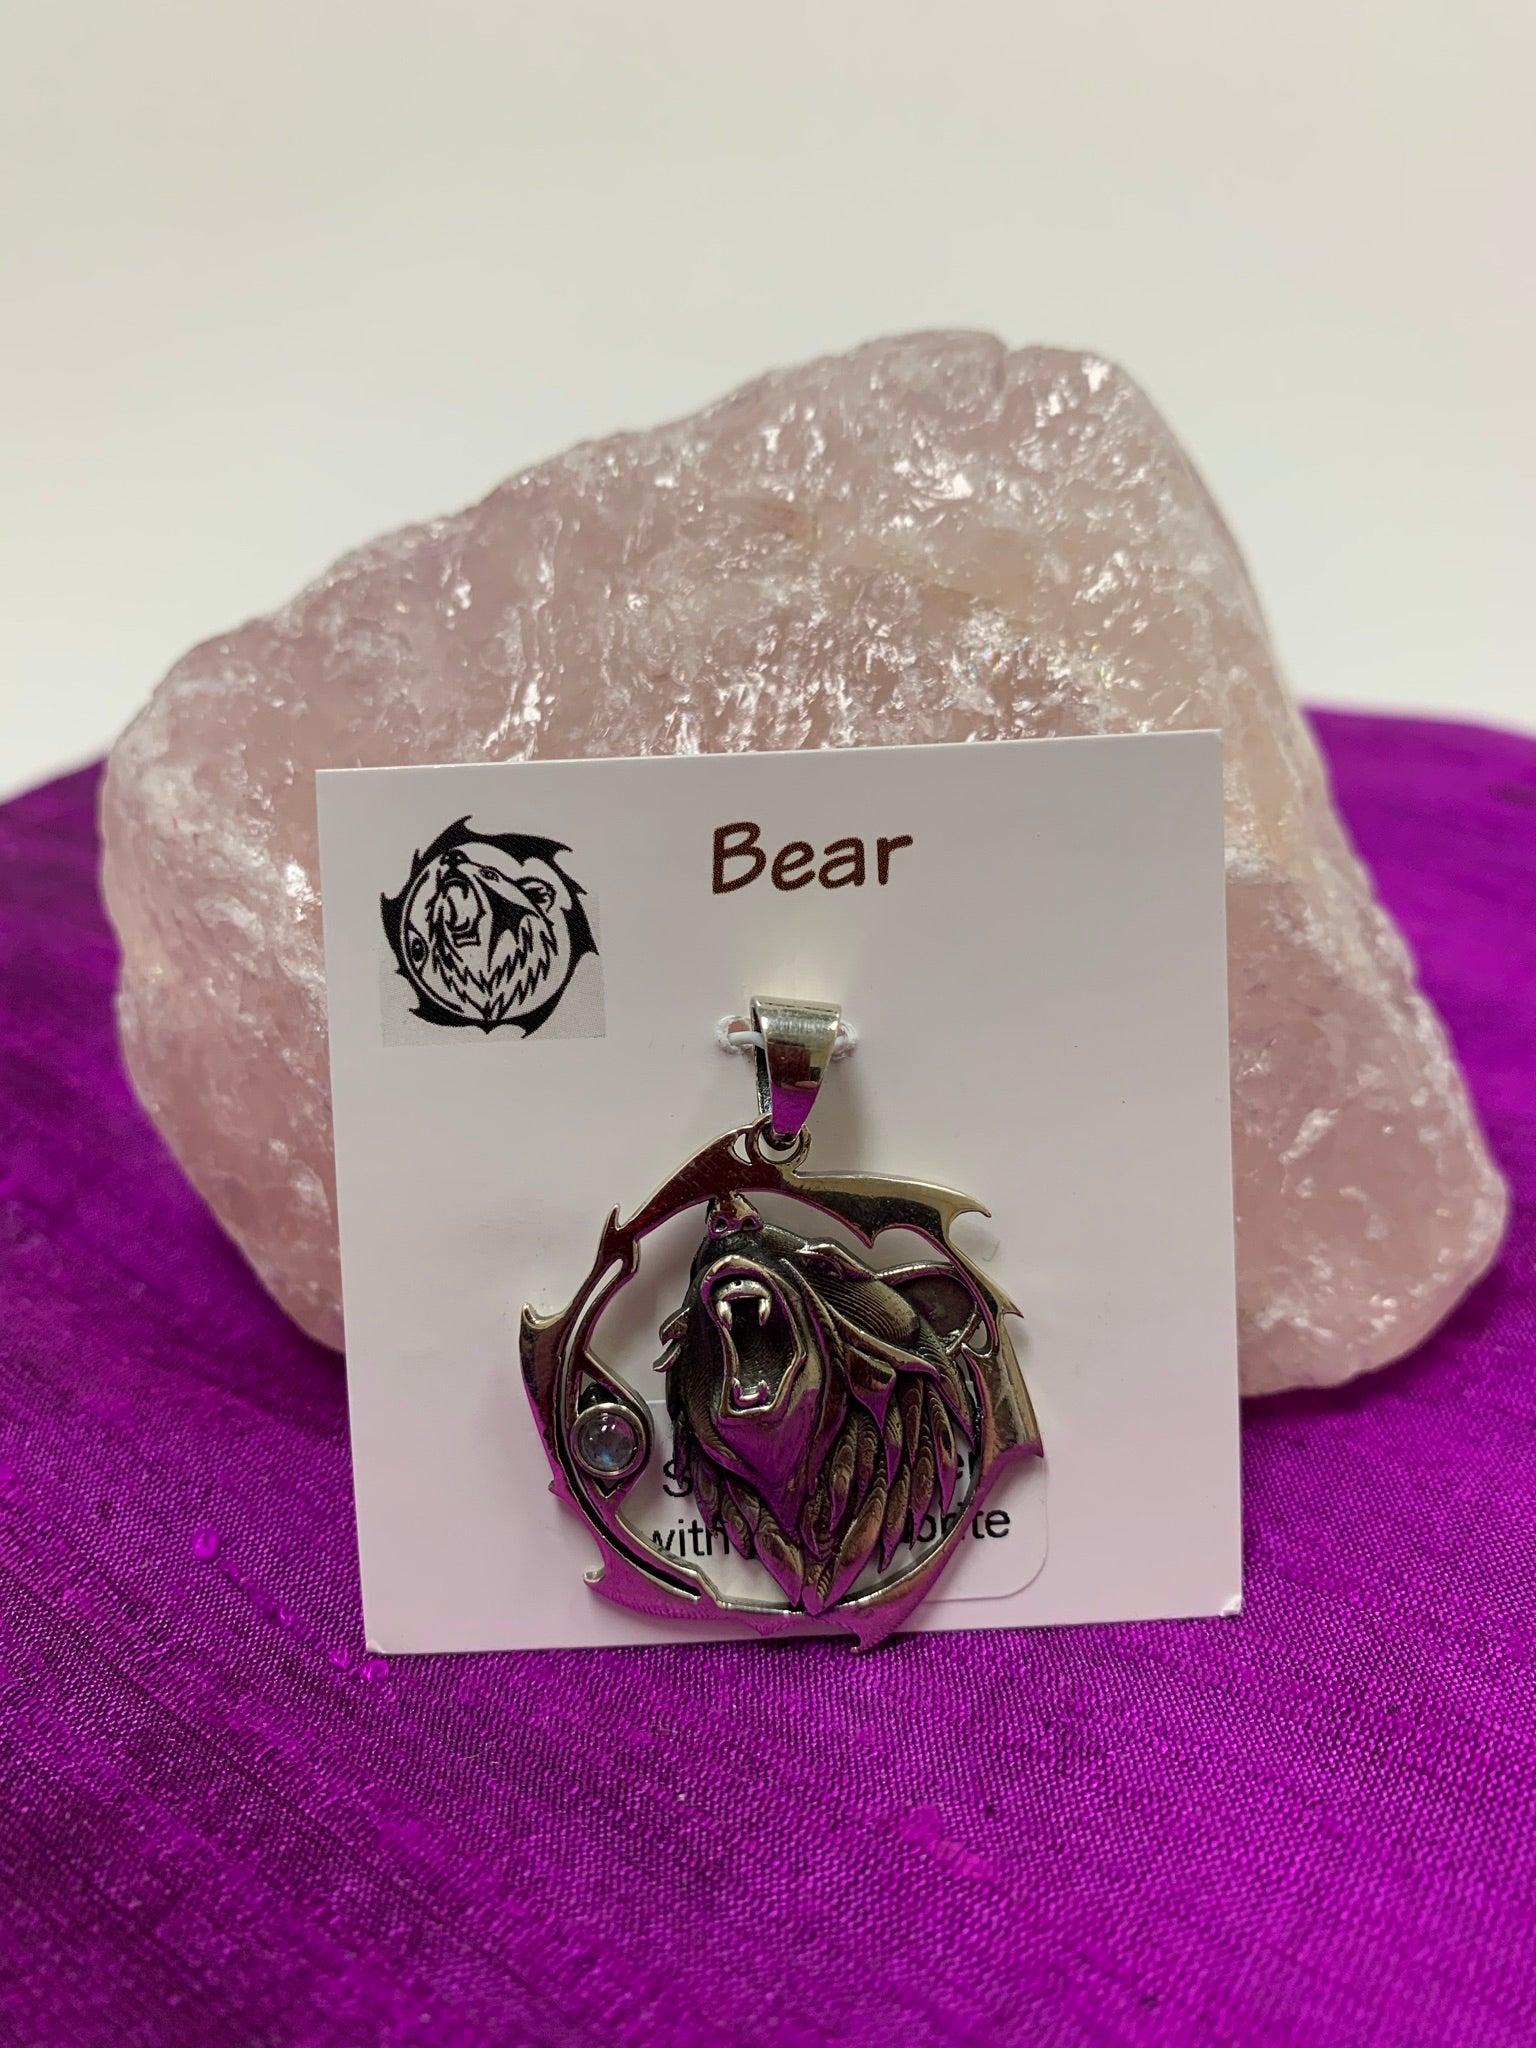 Sterling silver bear animal pendant, accented with a labradorite gemstone. The bear (mostly head neck area) is set within an open, stylized circle with the gemstone along the side (bear and circle both sterling). Wear your animal spirit's energy so you can take it anywhere you go! Pendant only - necklace chain not included.